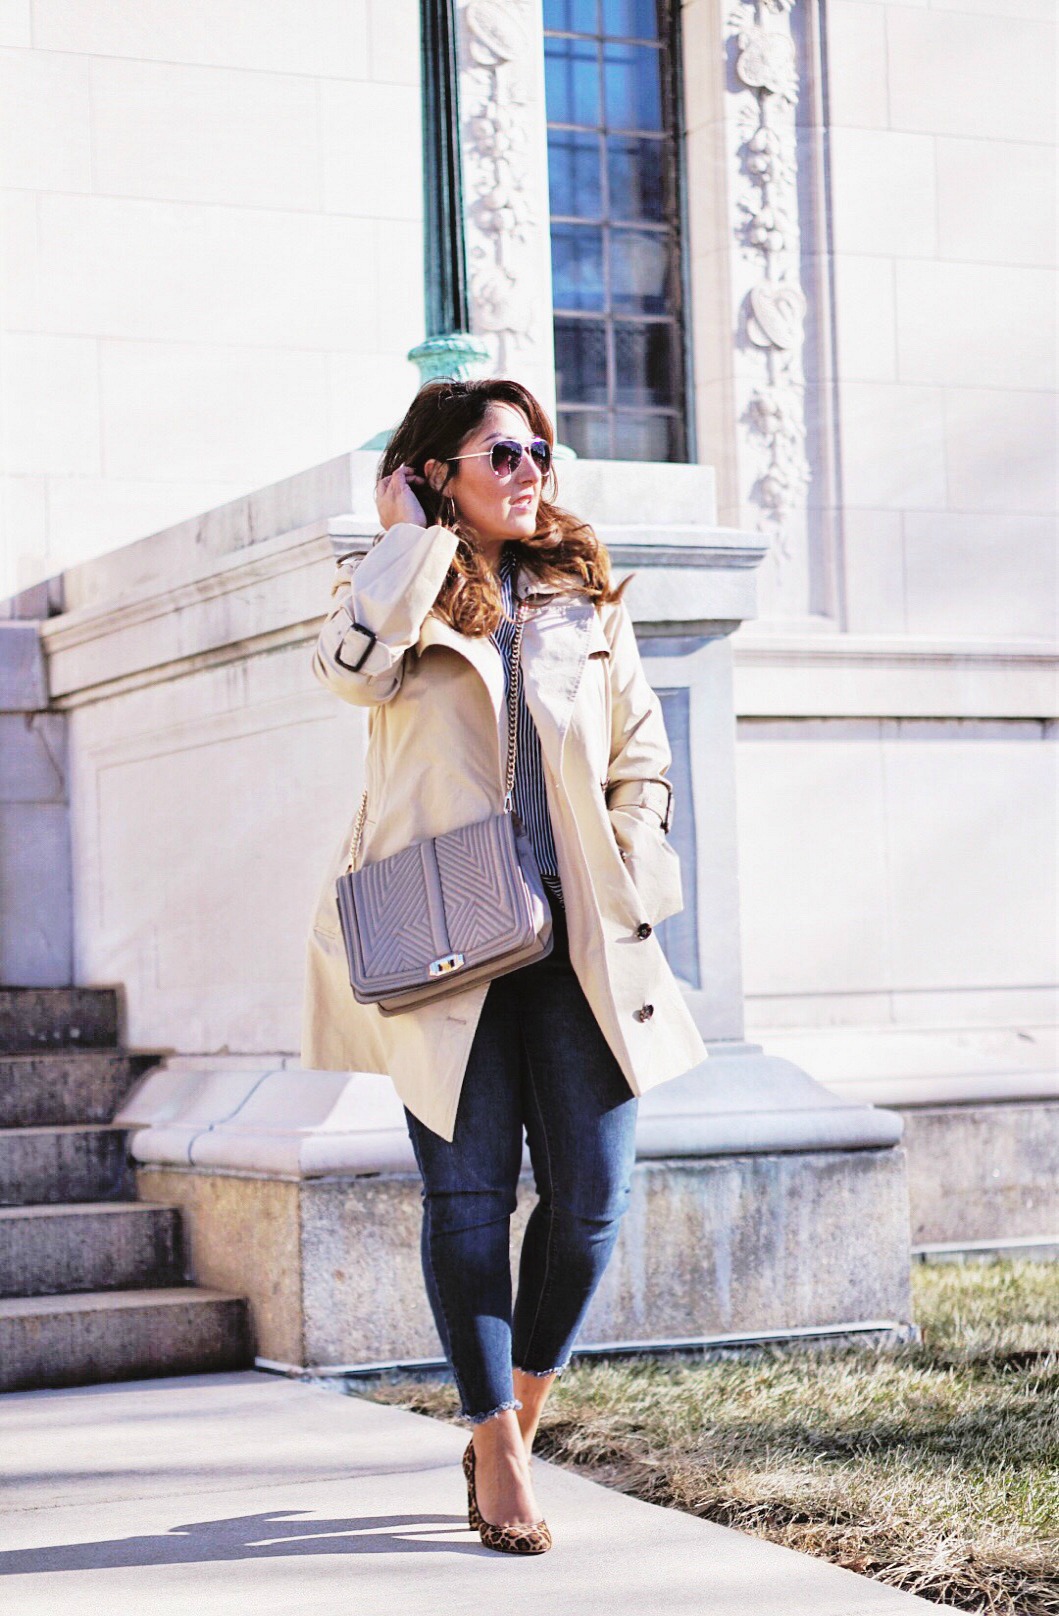 Styling the trench coat for a casual look.